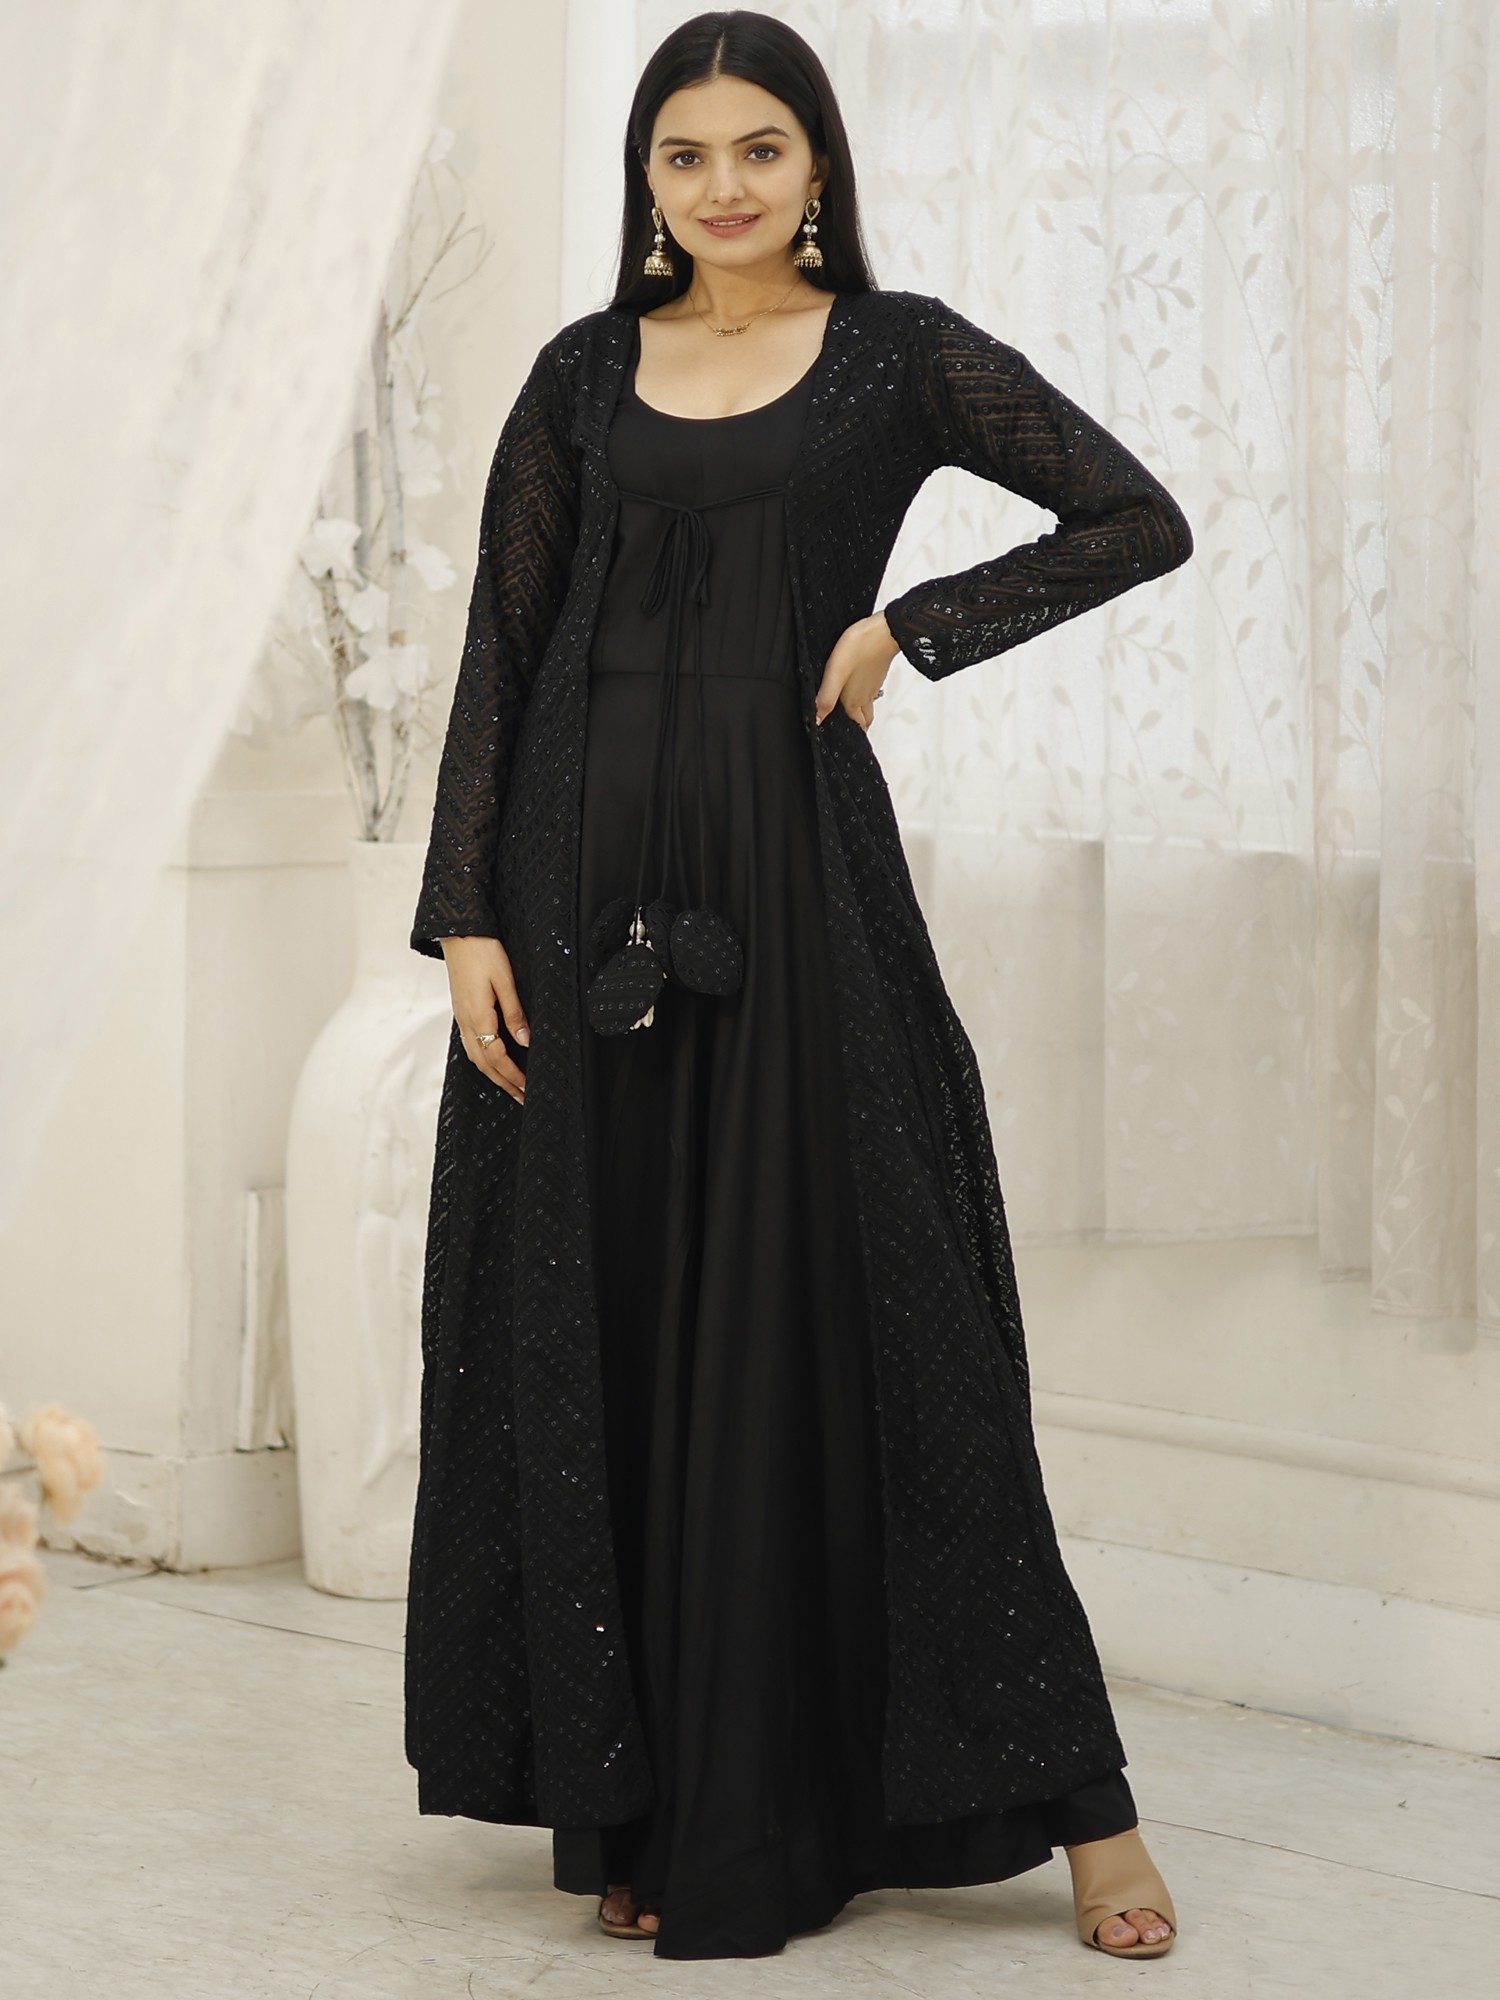 Buy Latest Collection of Dresses Ethnic Indian wear and Dresses only at  Biba India